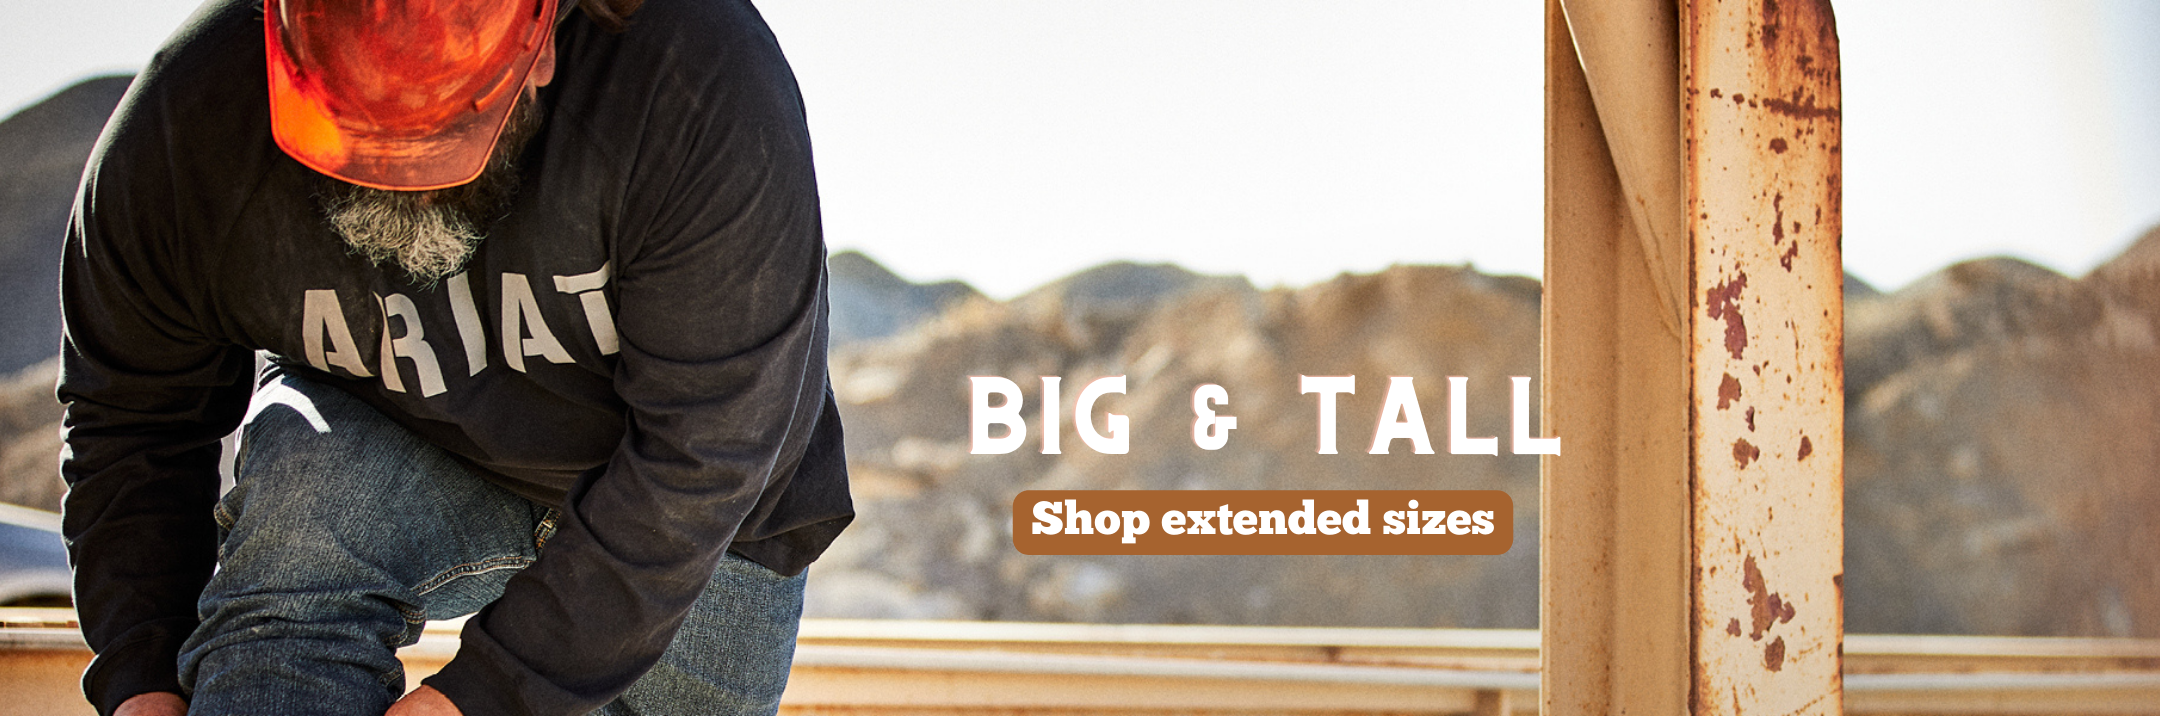 Men's Big And Tall Clothing - Big And Tall Workwear - Harrisons USA